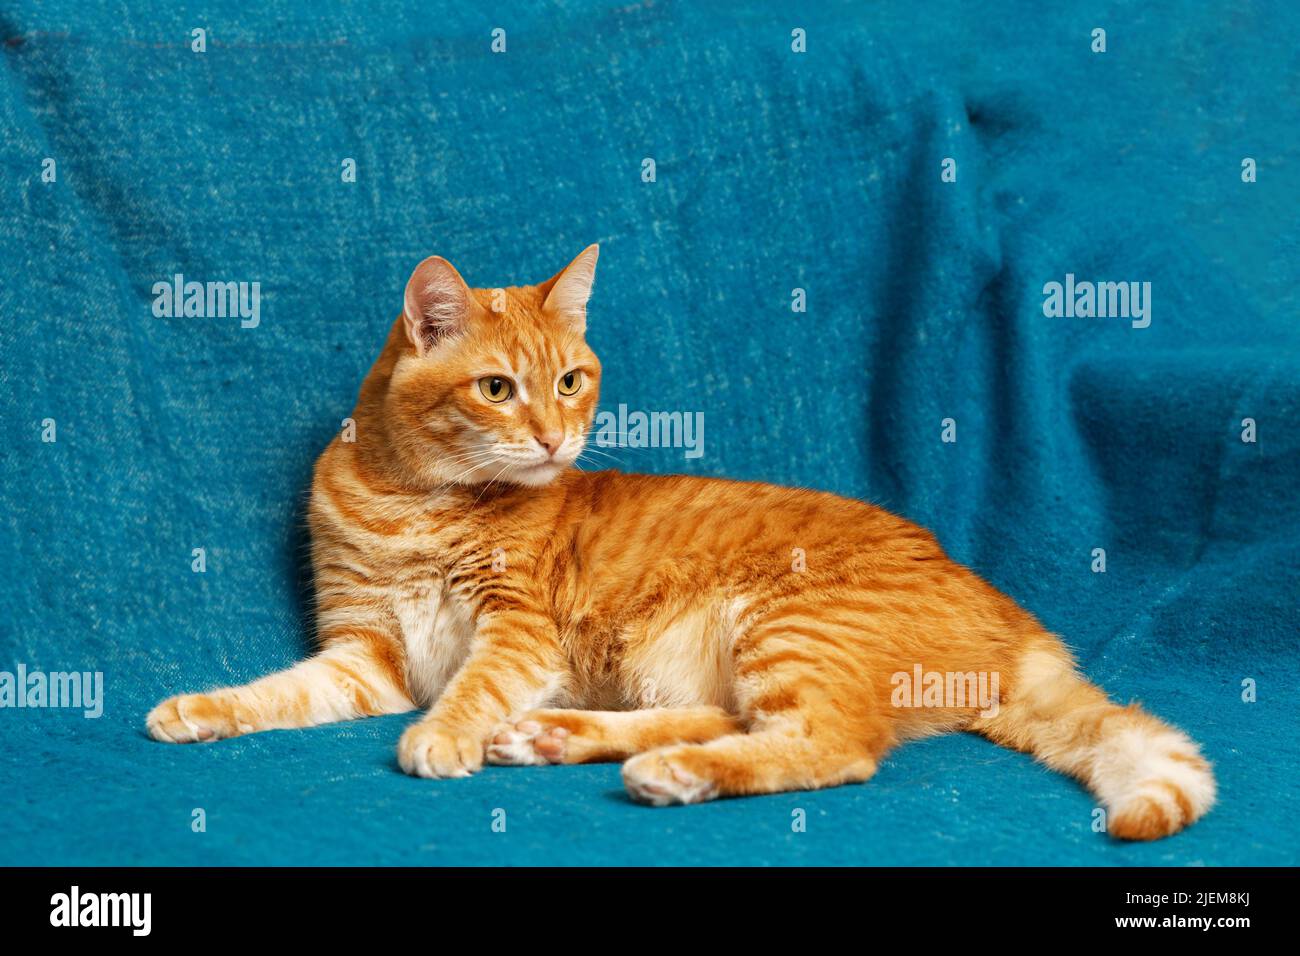 Portrait of ginger cat on blue textile background. Copyspace. Stock Photo